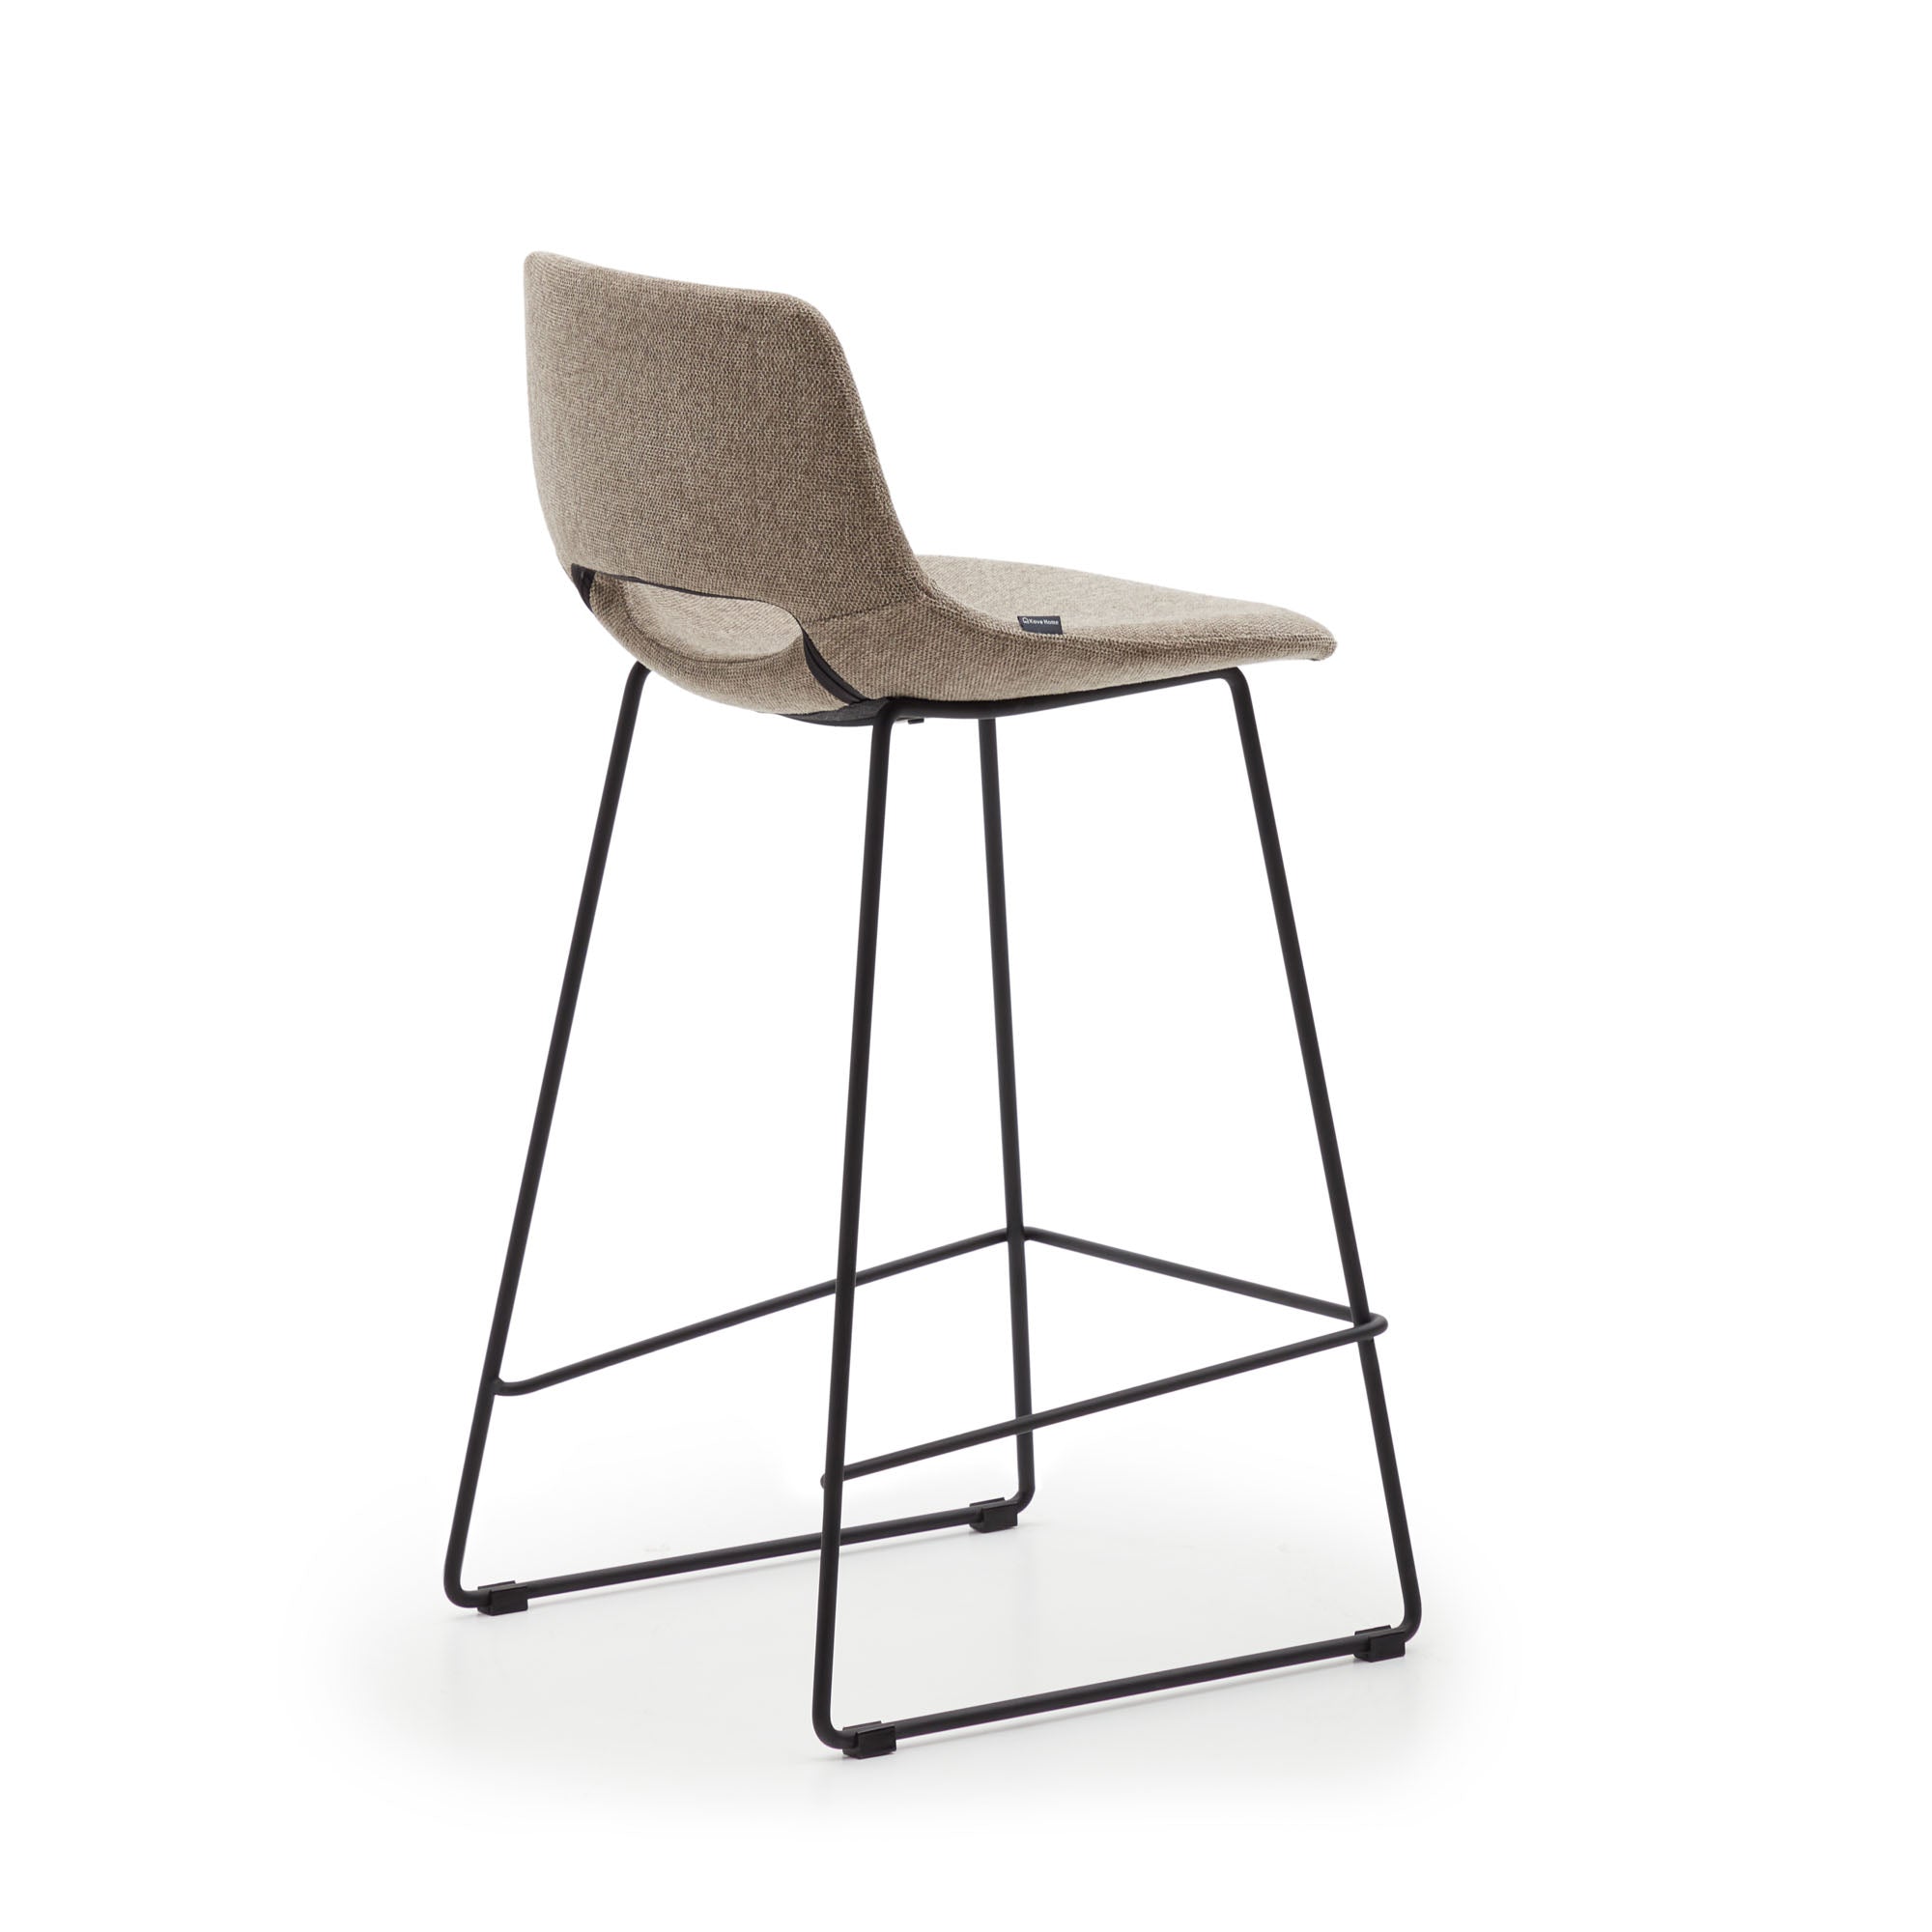 Zahara bar stool in brown with steel legs in black finish, height 65 cm